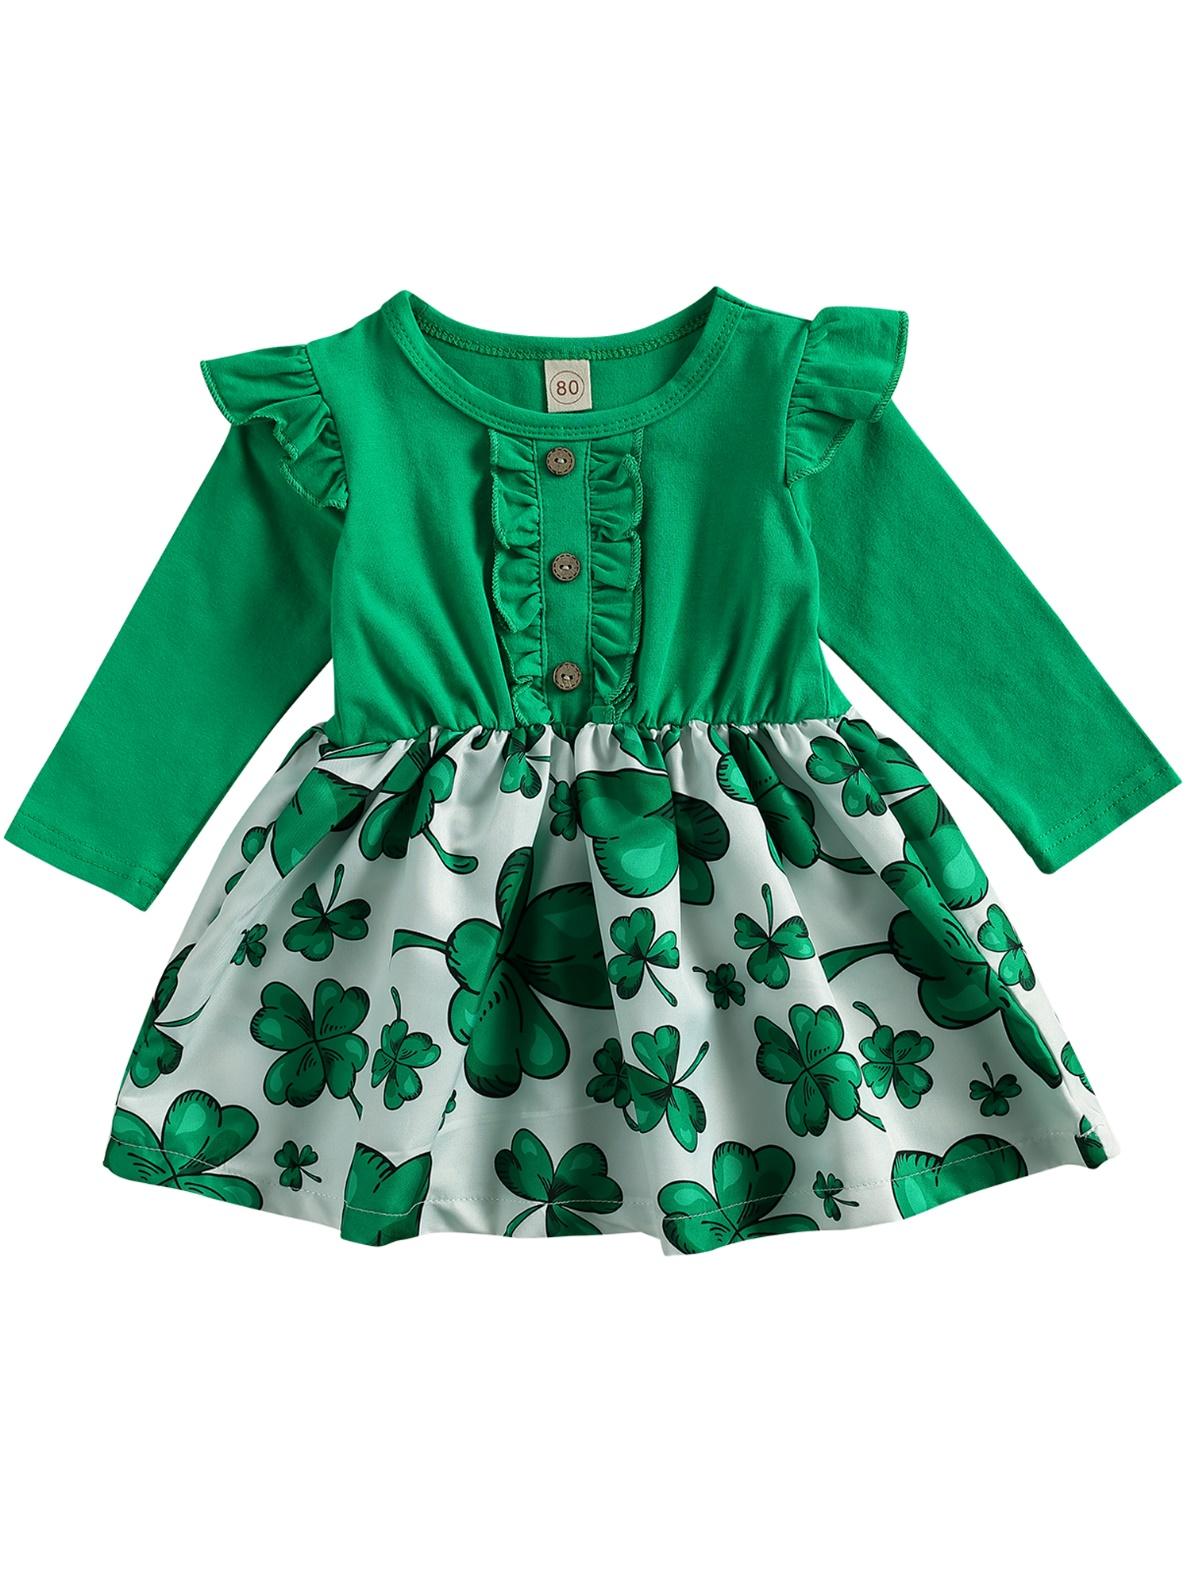 Best St. Patrick's Day Outfits for Toddler Boys & Girls